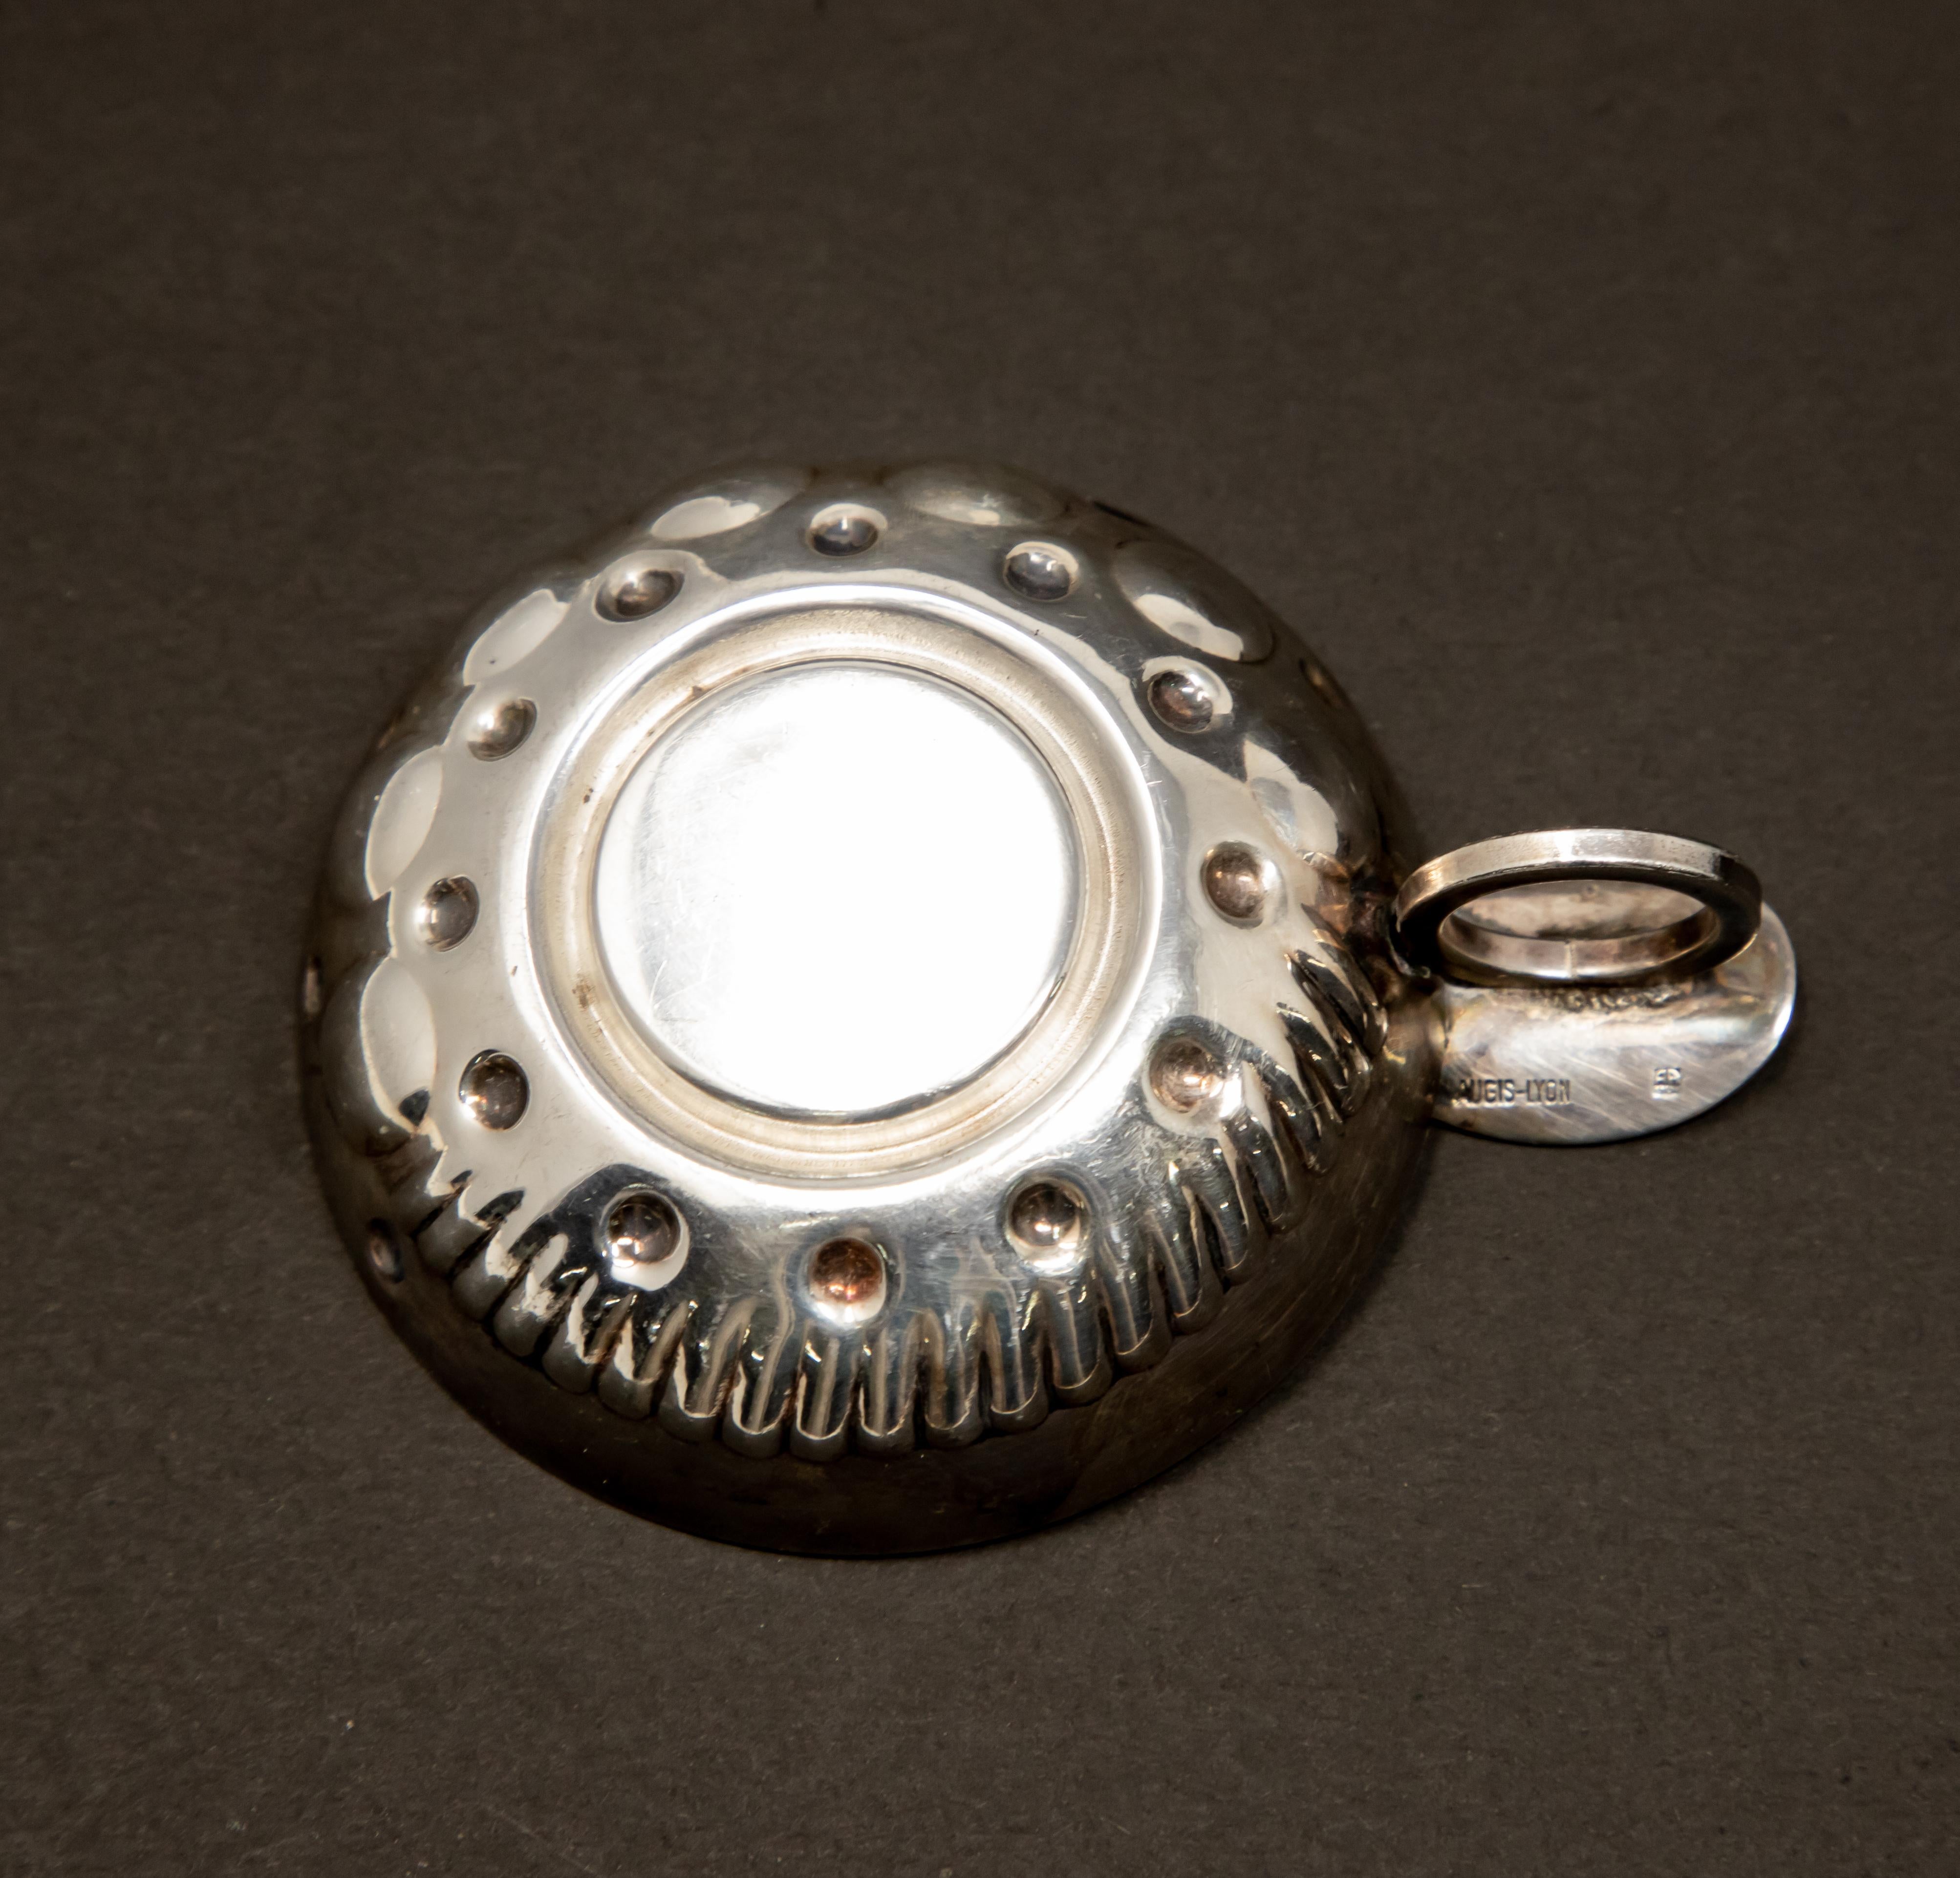 Offering this beautiful Augis-Lyon sterling silver wine taster. The inside medallion is motorized vehicle with Berliet 1897, and behind the back wheel is marked Augis. The handle is a ring with a plate on top. The back of this plate is marked with